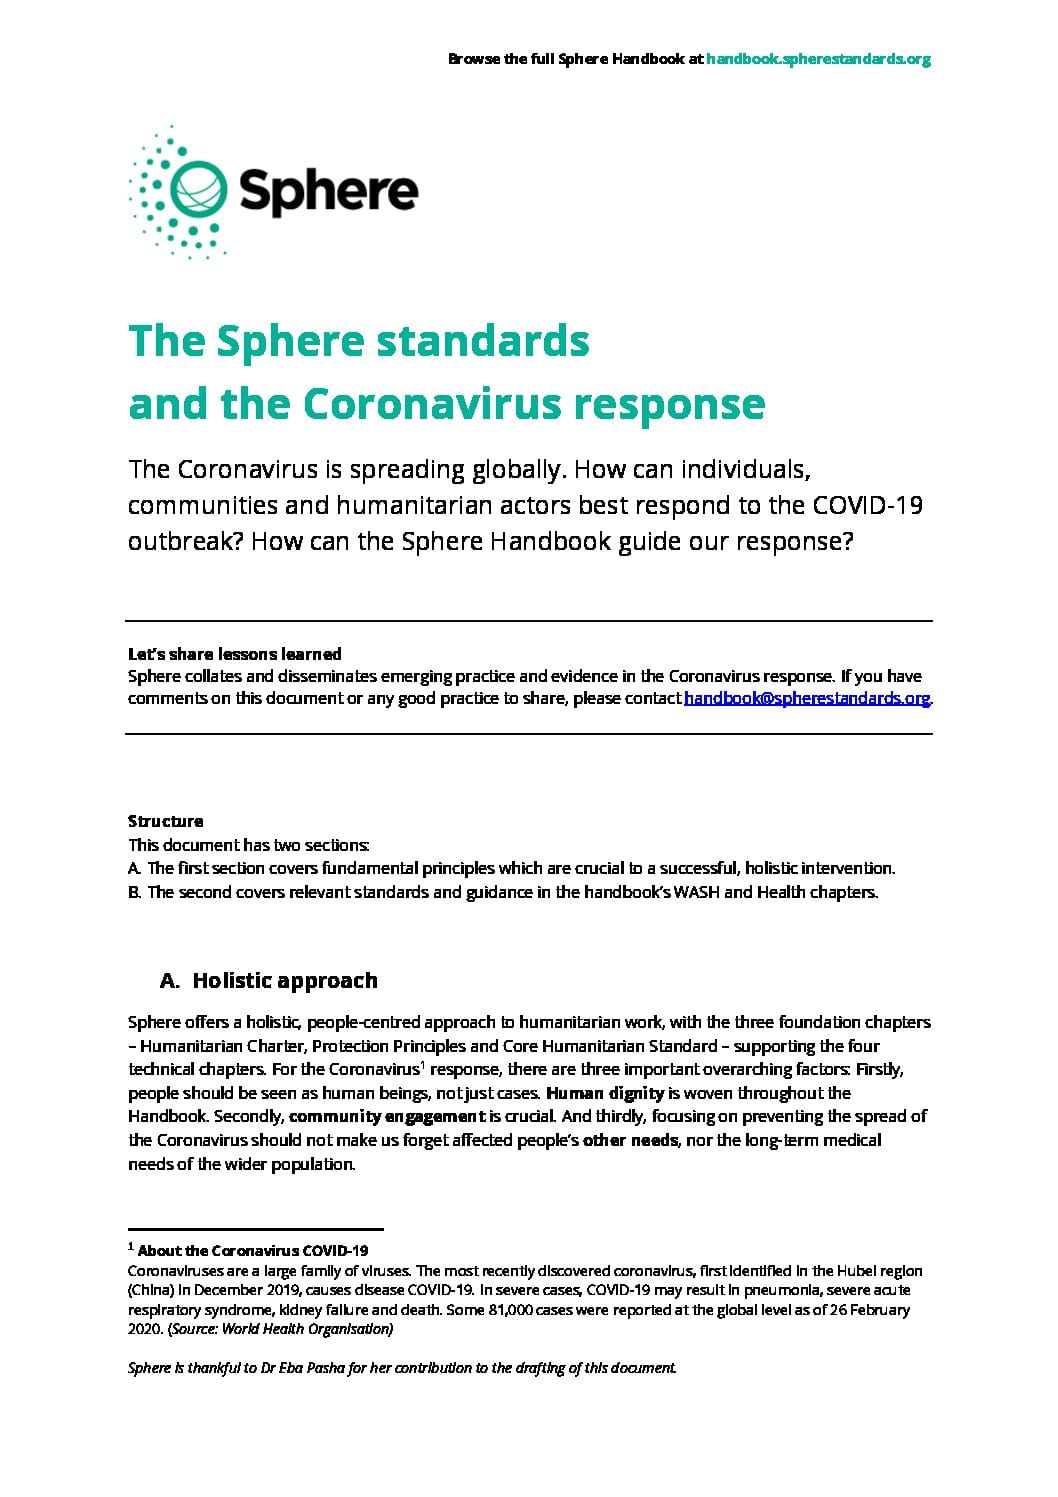 COVID-19 Guidance Based on Humanitarian Standards